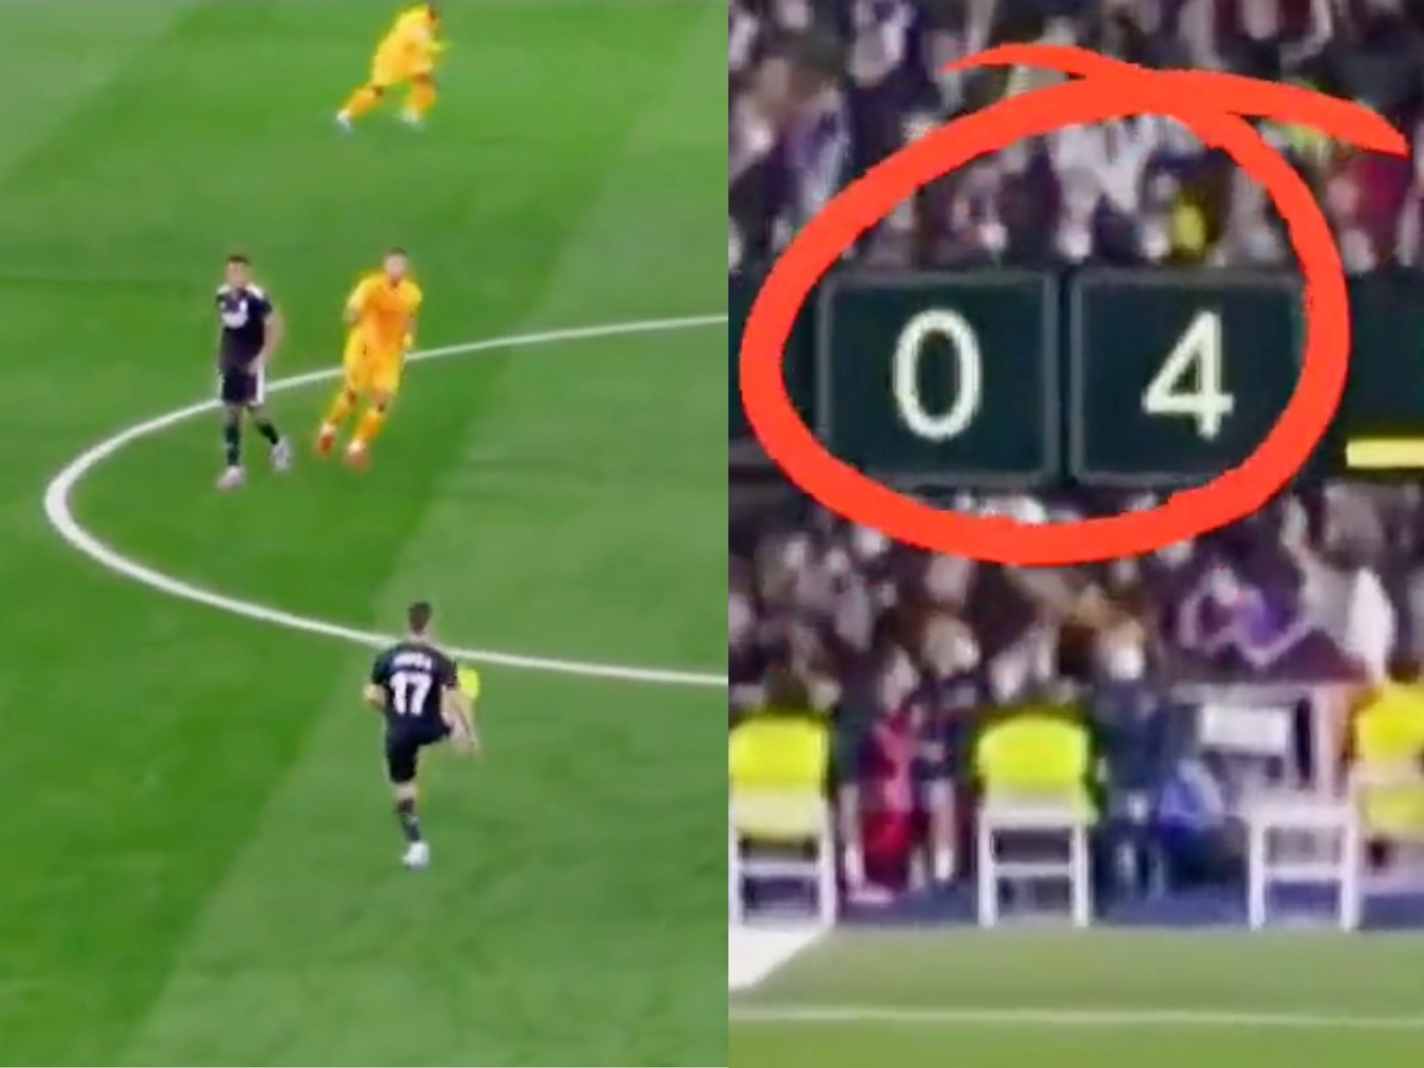 Lucas Vazquez showboating at 4-0 against Barcelona down was utterly pointless